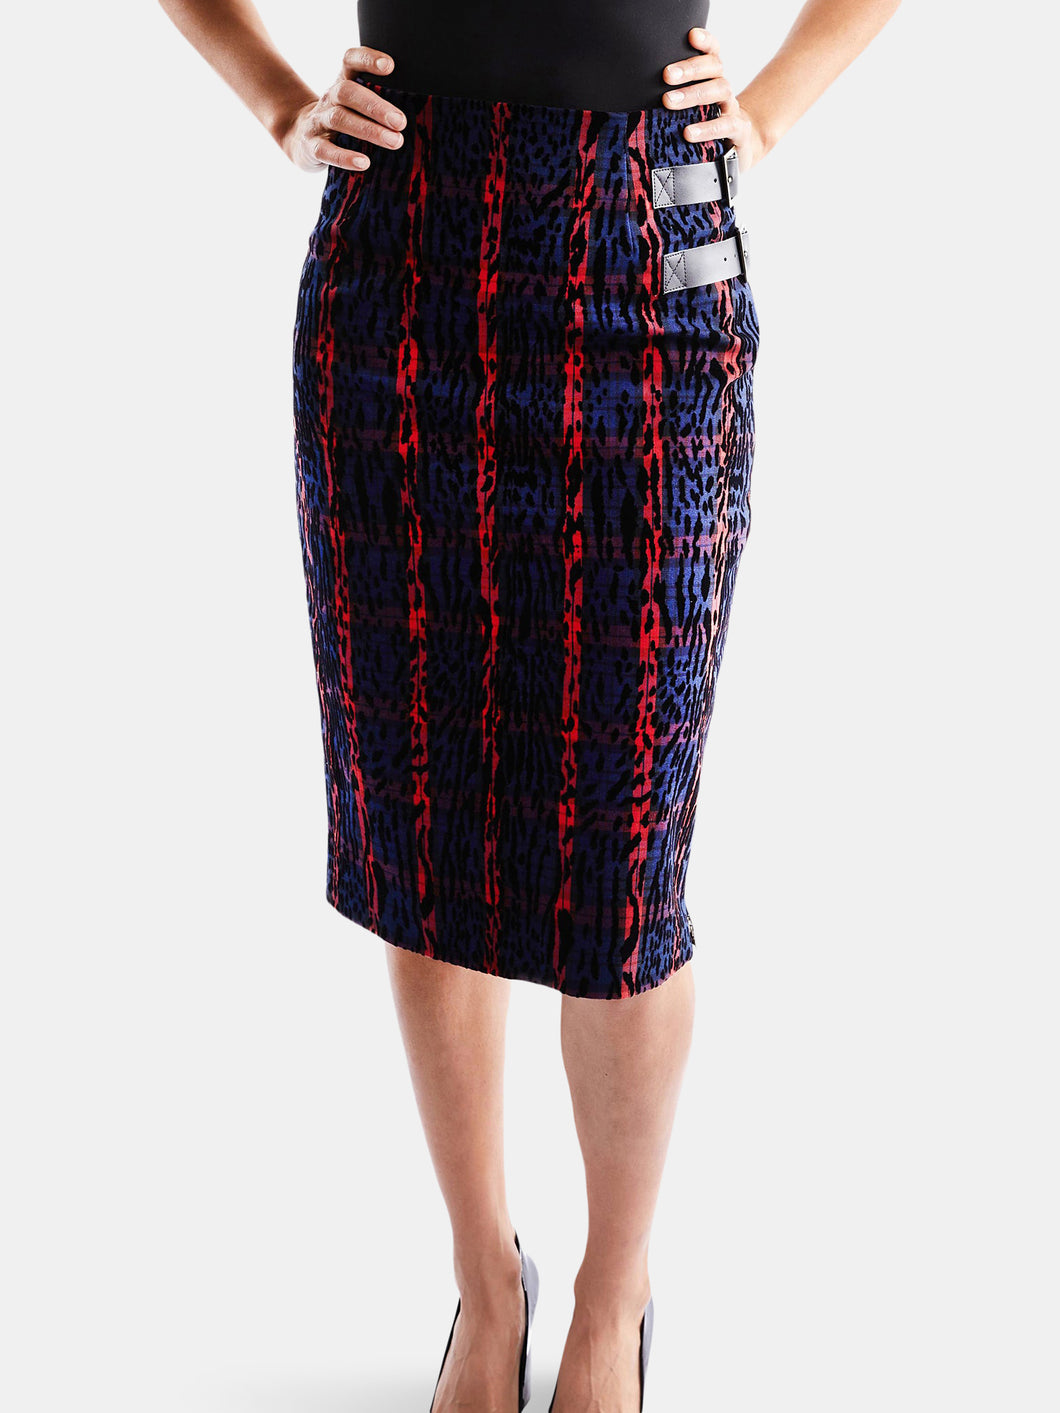 Leopard and Plaid Pencil Skirt